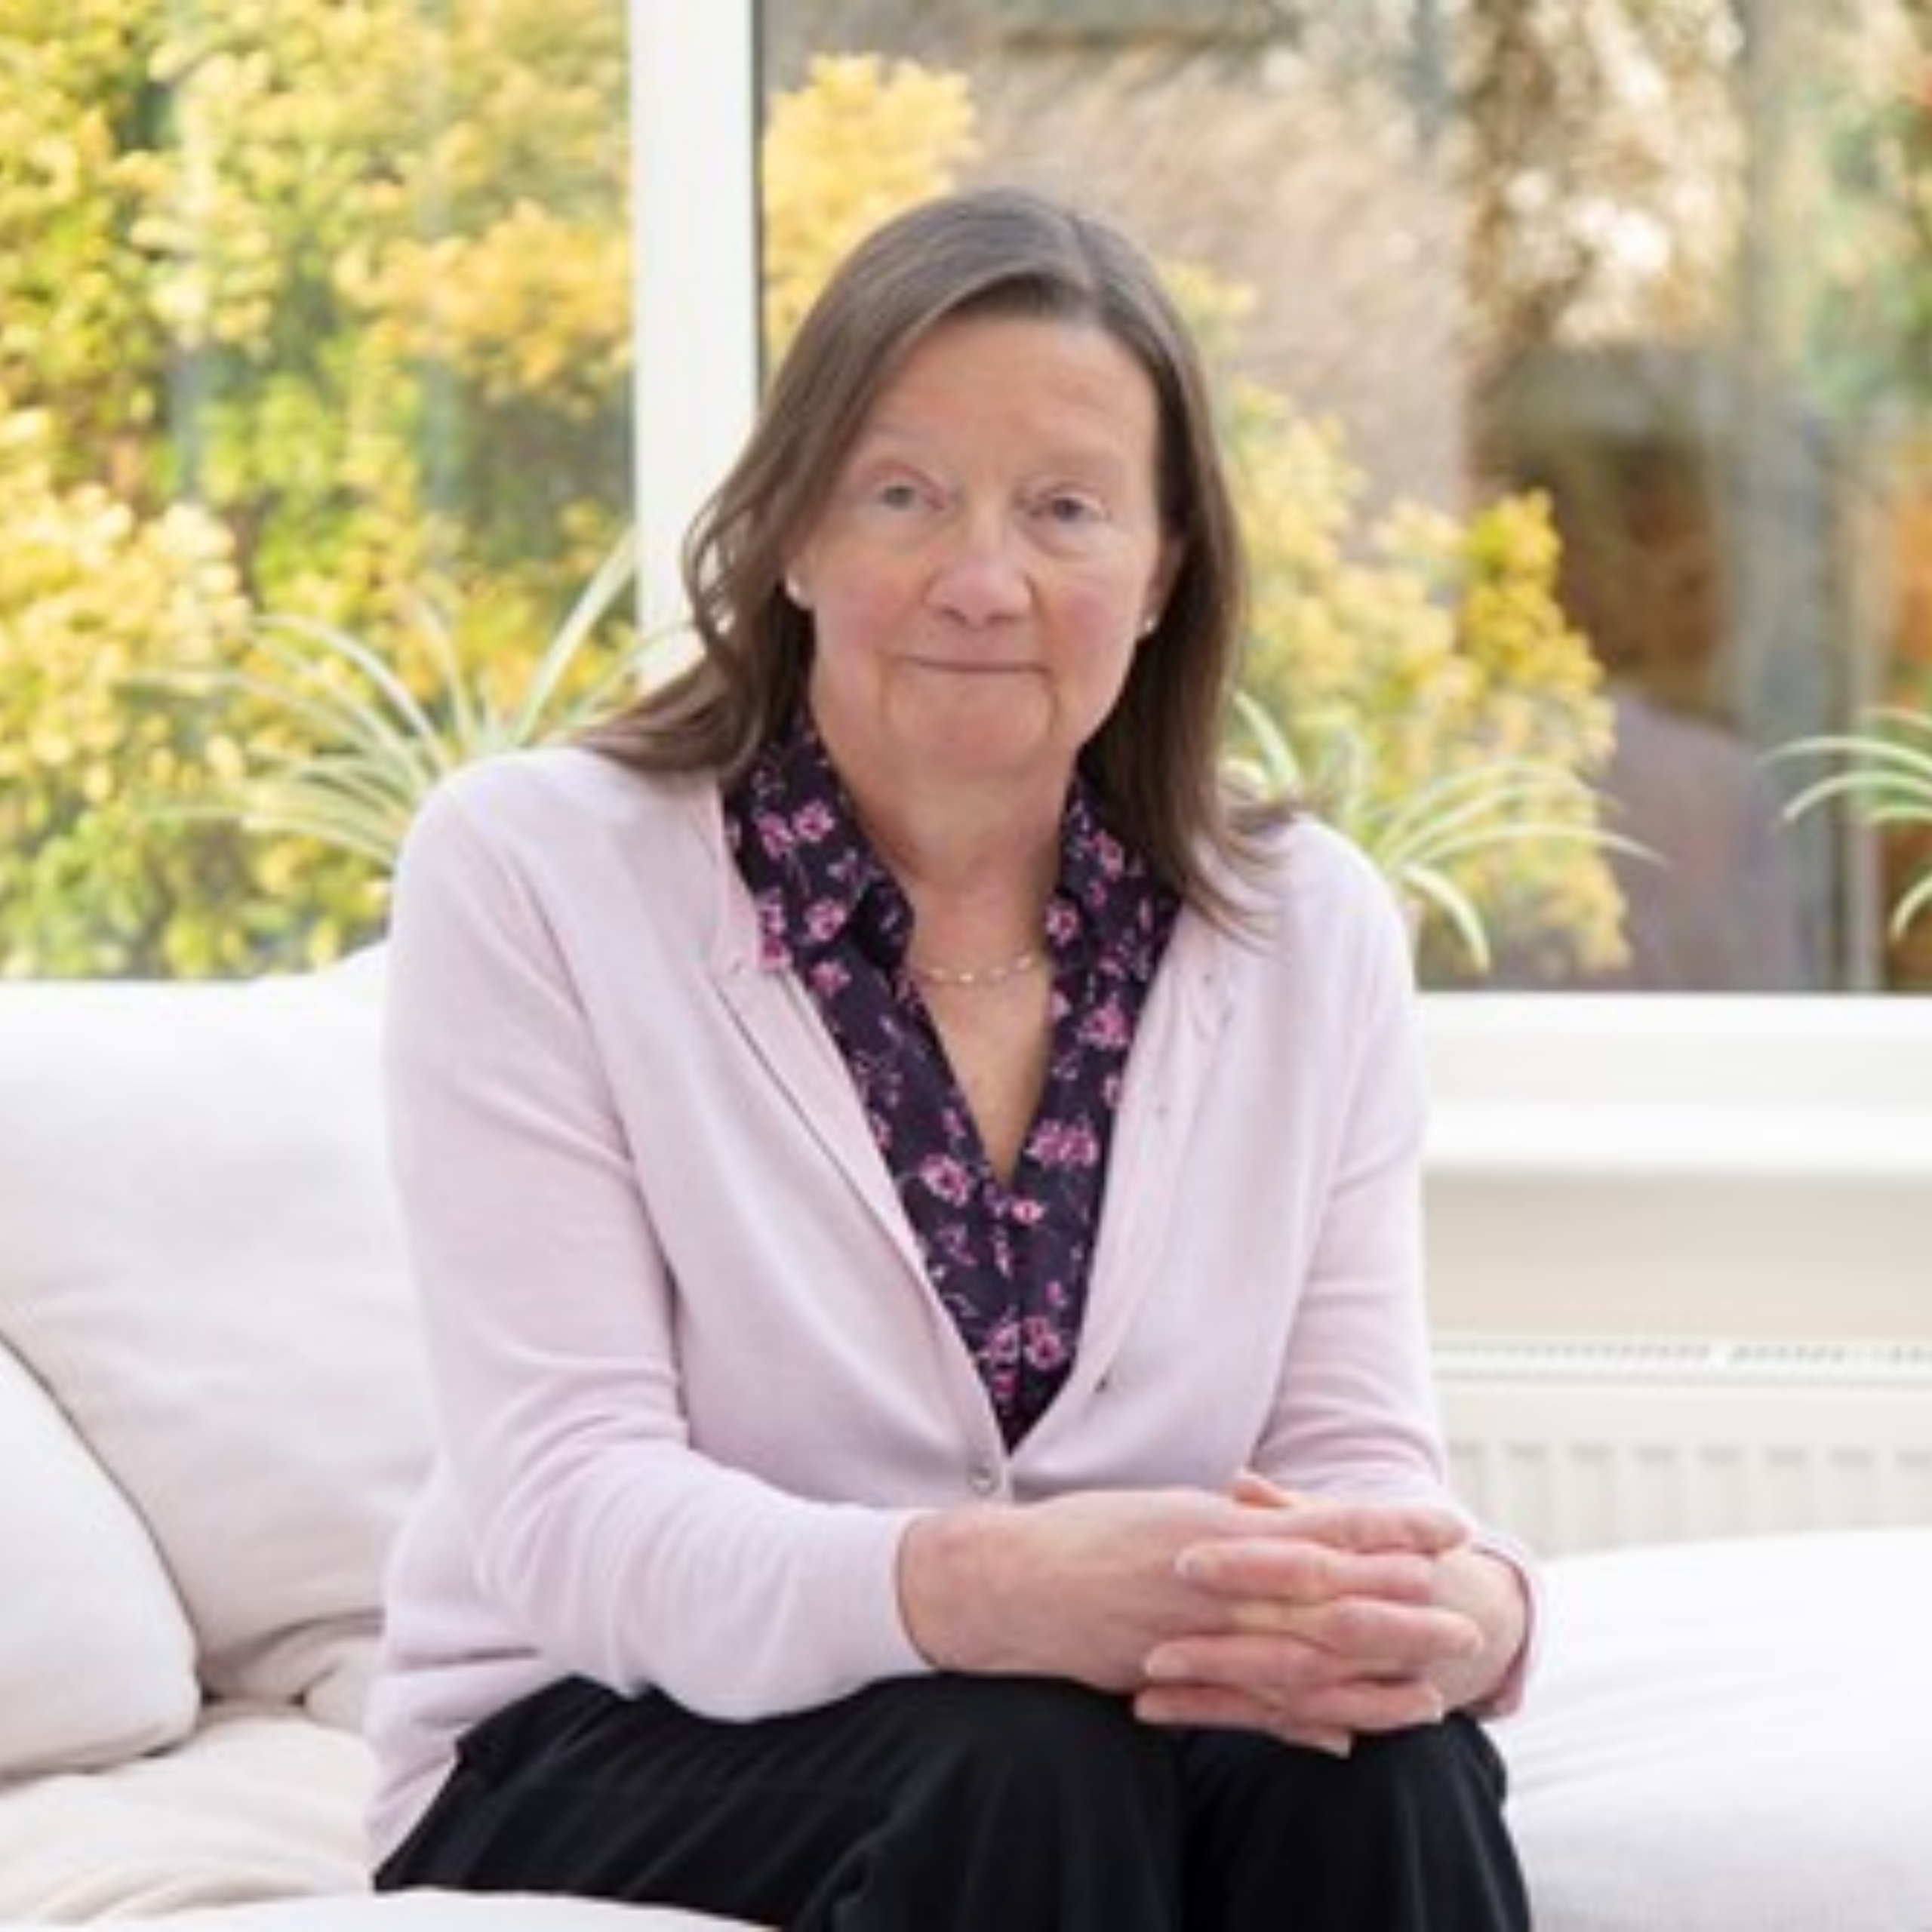 A photo of Judith Eva, our clinical negligence client who was operated on by Ian Paterson